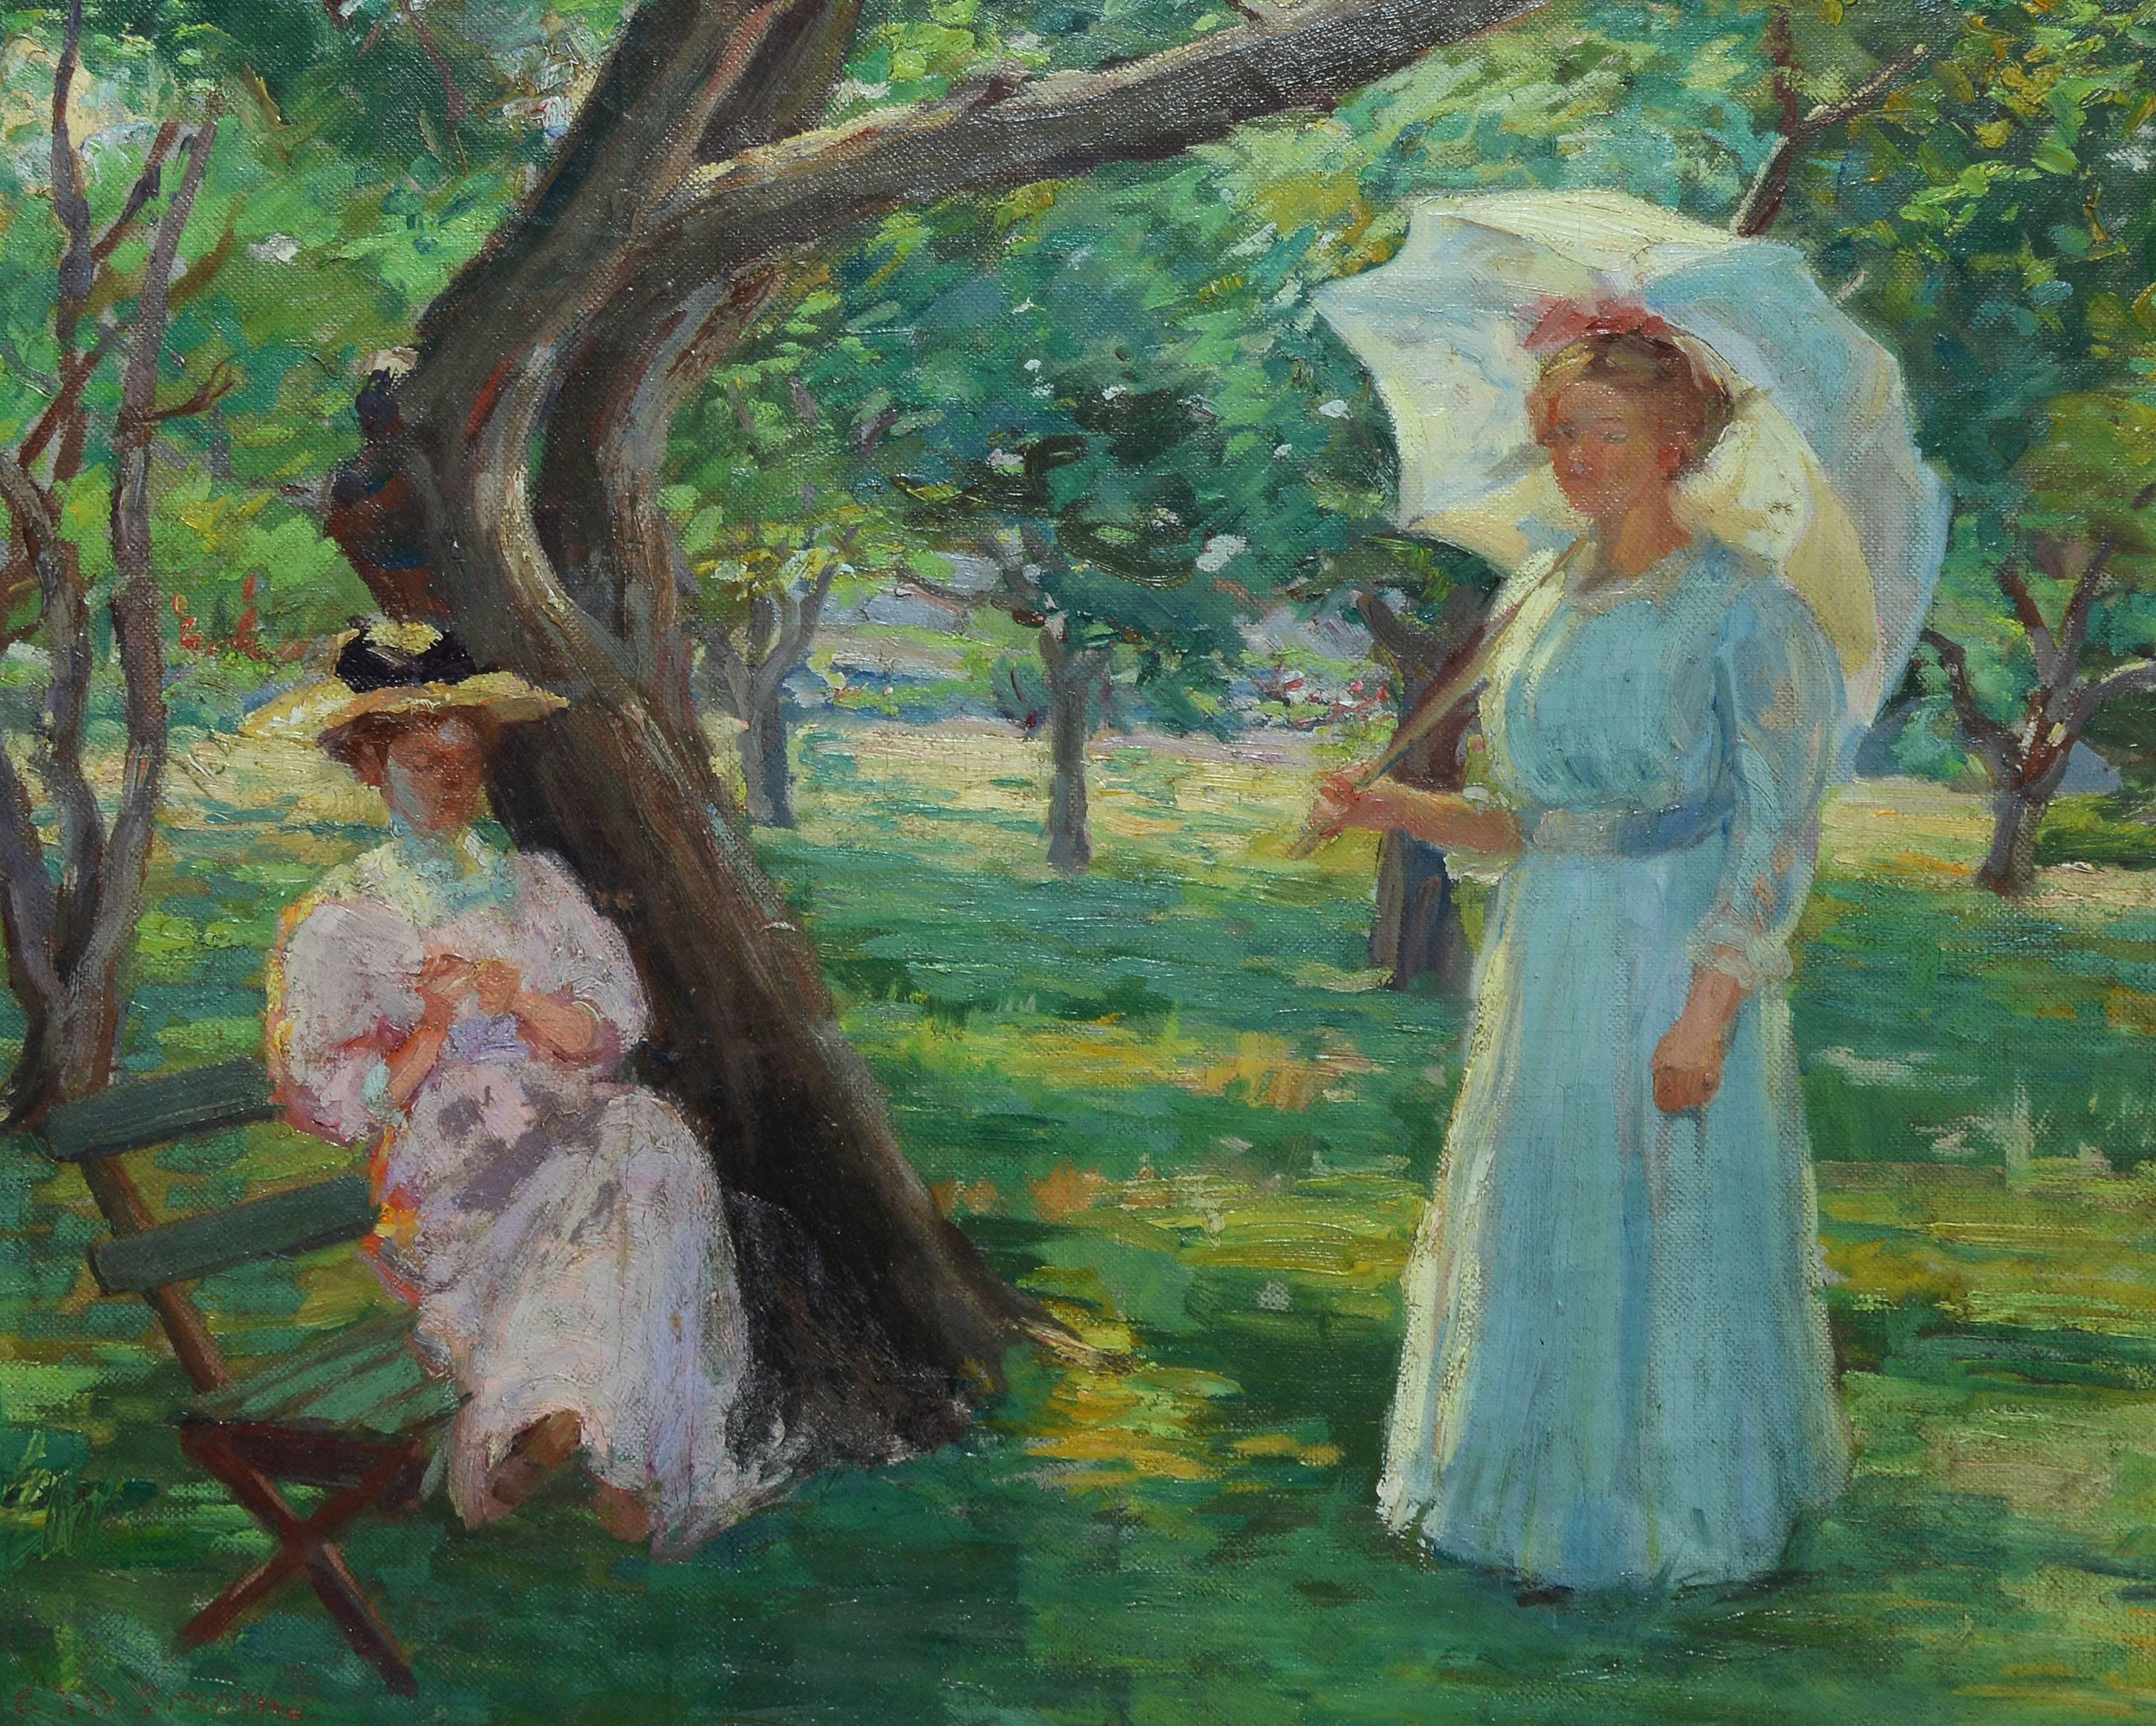 Sunny Day in the Park - American Impressionist Painting by Unknown